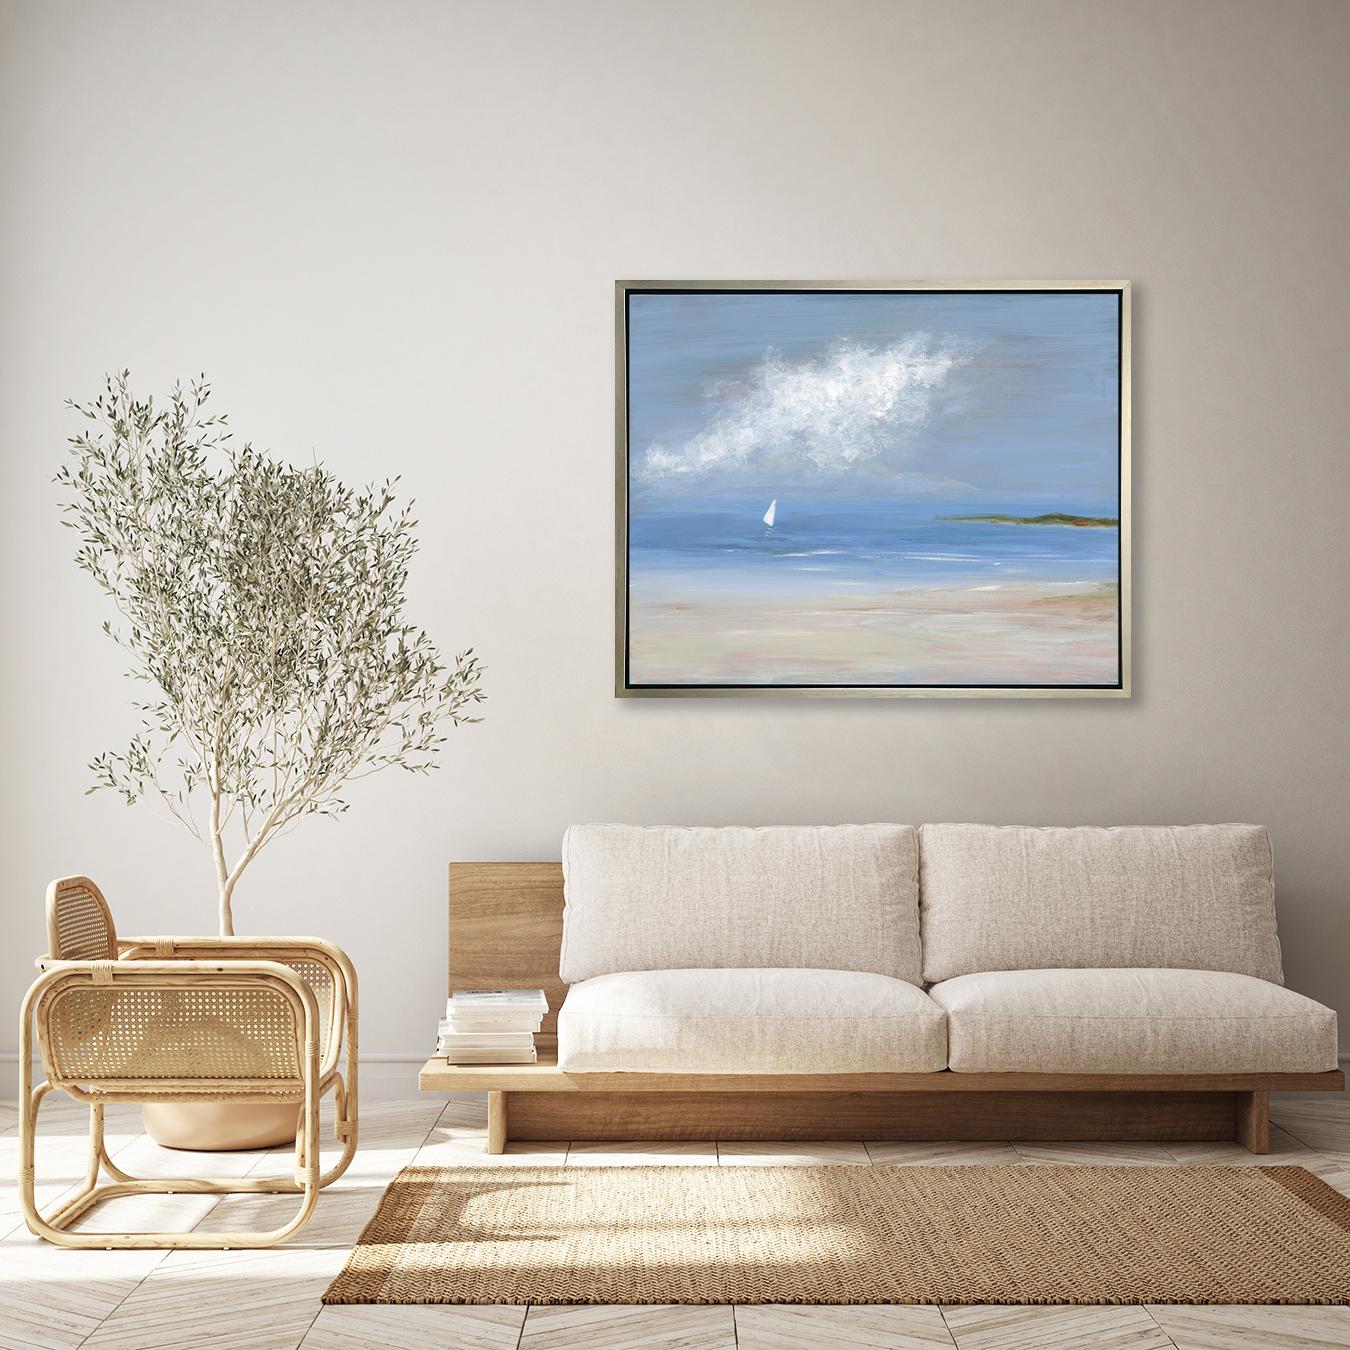 This limited edition seascape print by S.C. Aldo captures an abstracted coastal scene overlooking water from a sandy shore, with greenery lining part of the horizon and a sailboat sailing in the distance under abstract white clouds. 

This Limited